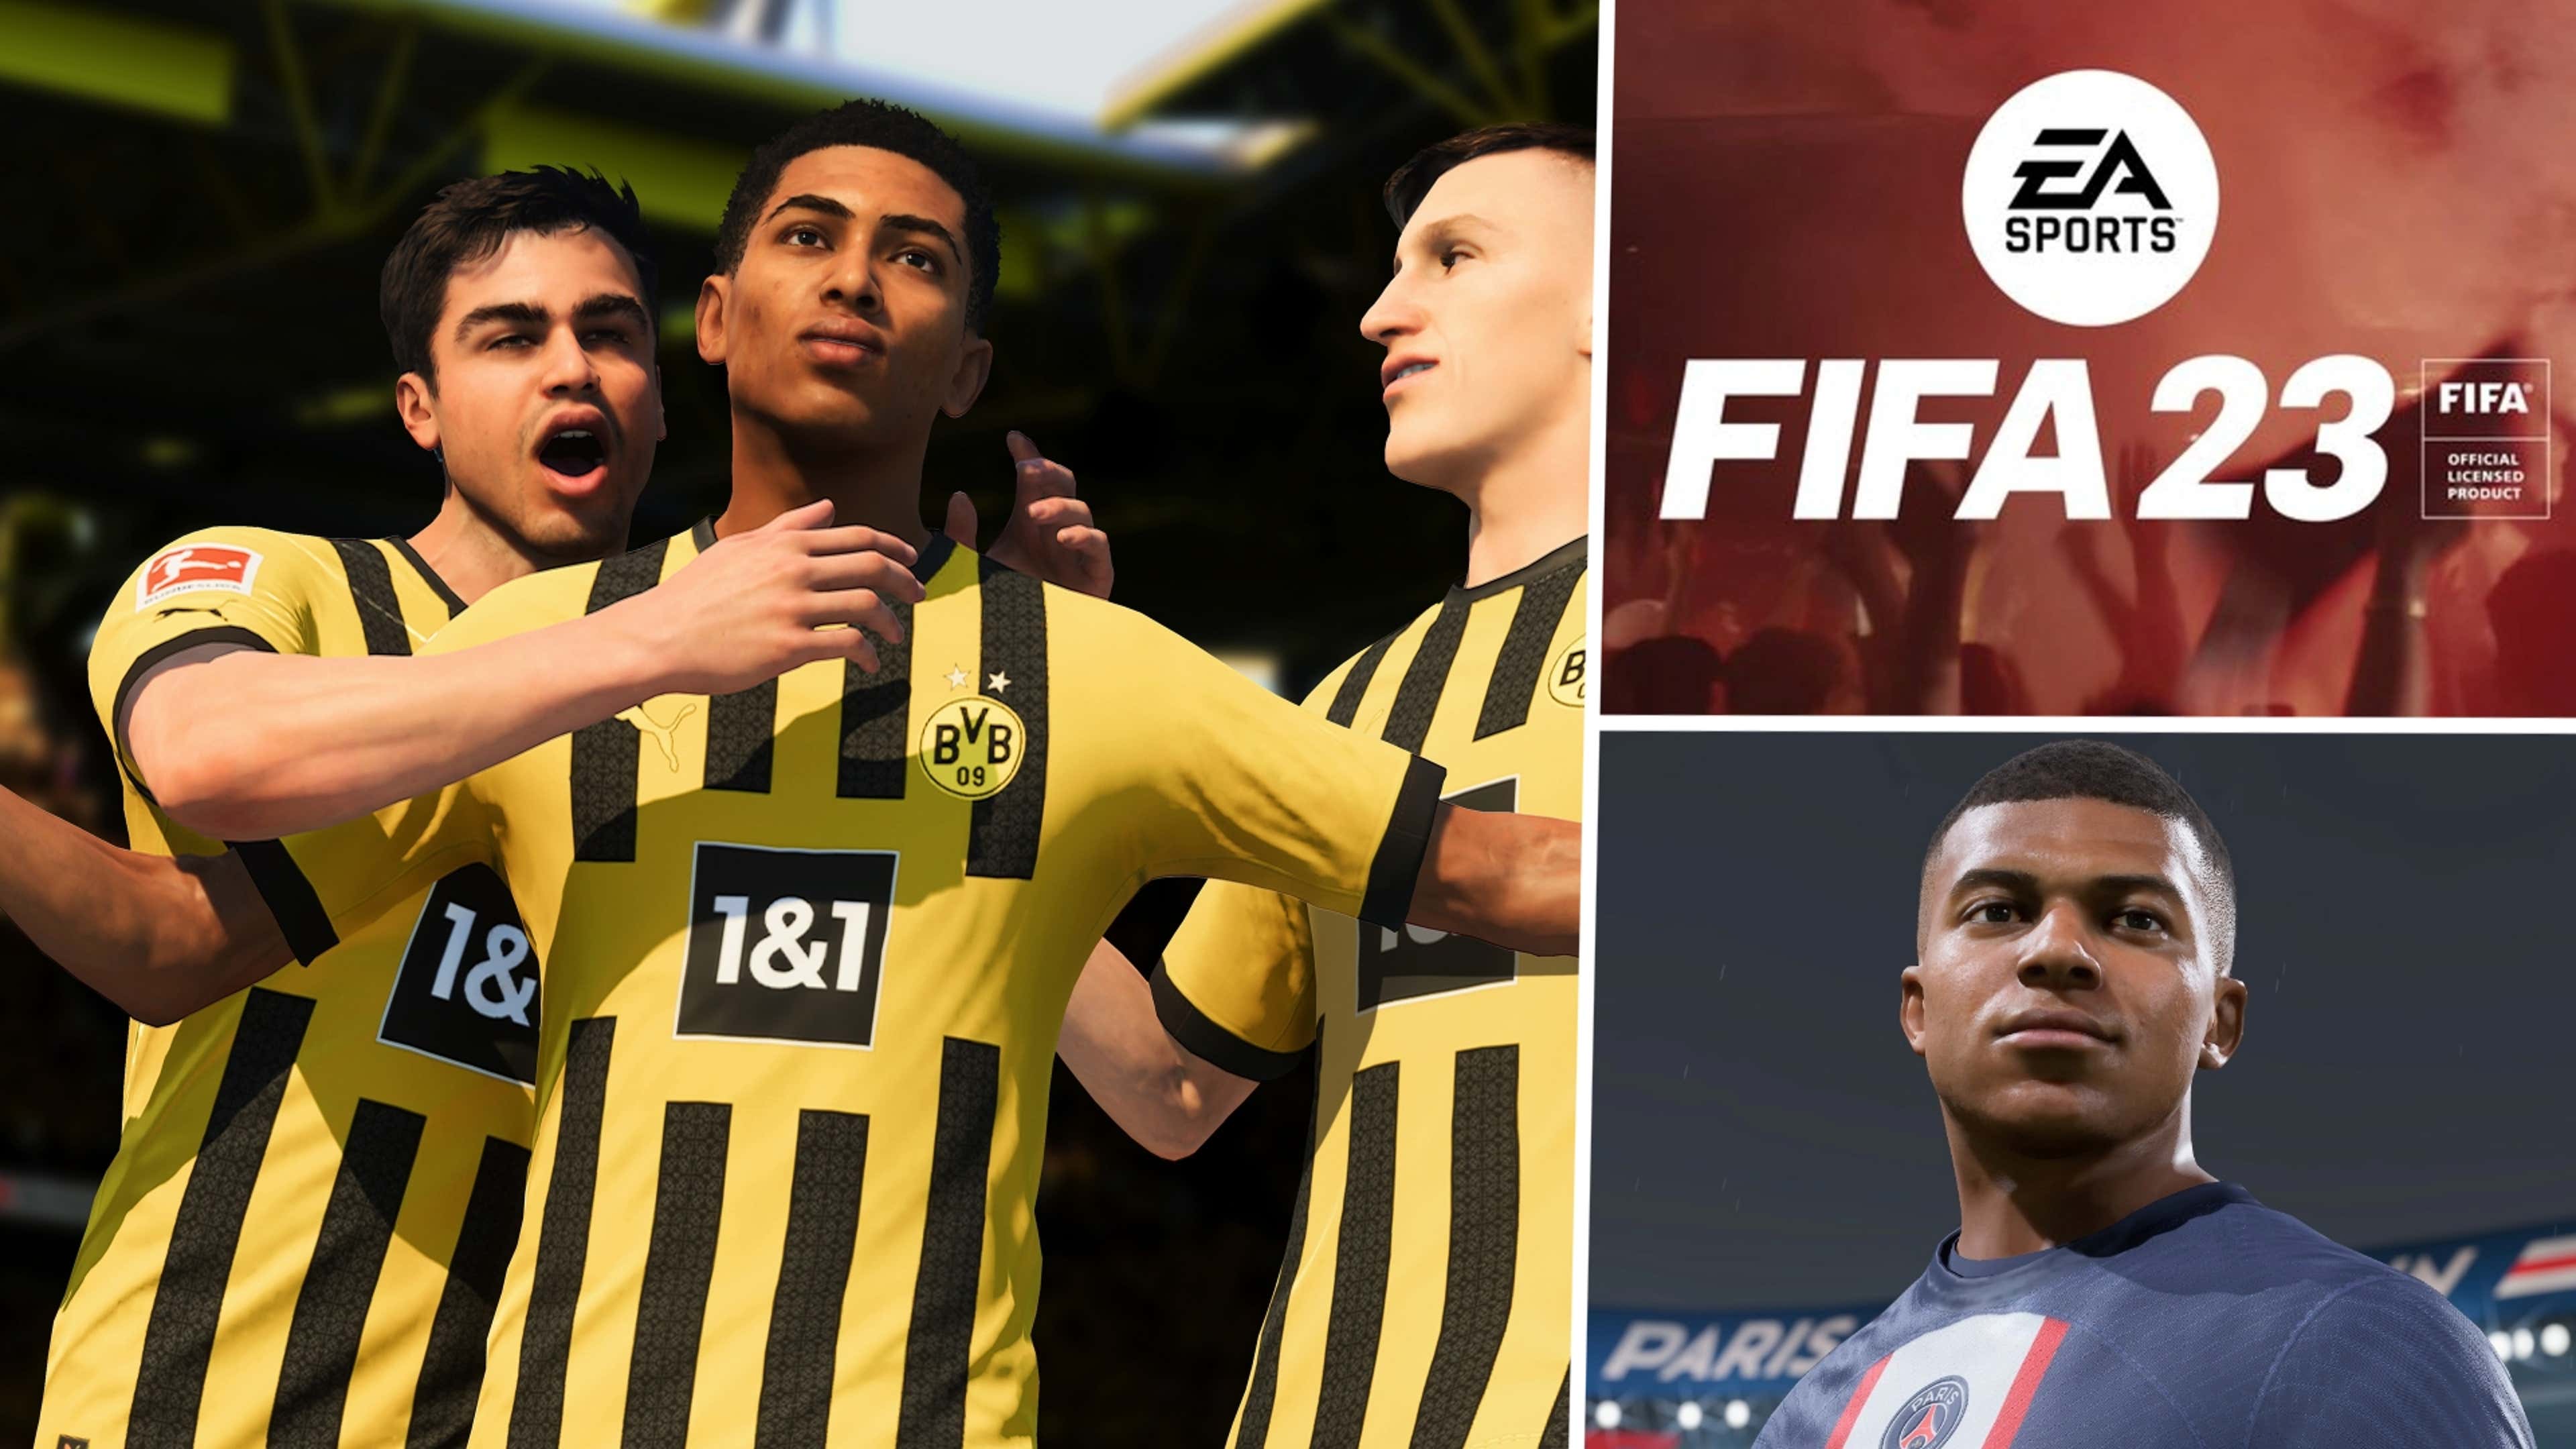 How To Fix Brazil National Team Squad On FIFA 23 